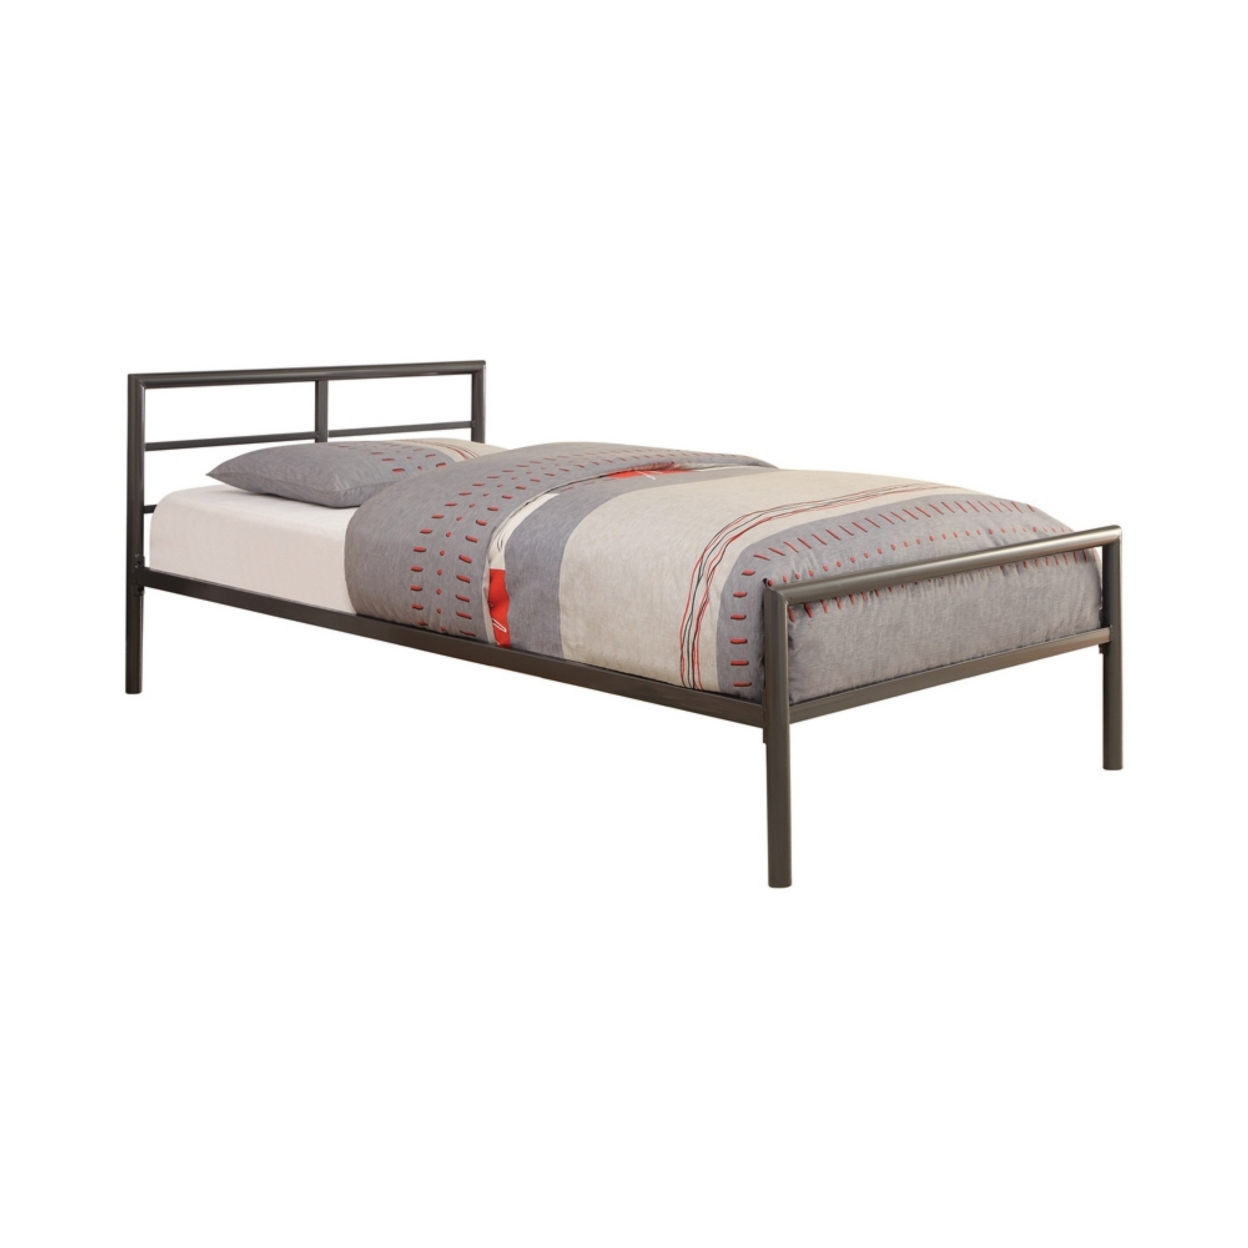 Traditional Styled Twin Size Bed With Sleek Lines, Gray- Saltoro Sherpi